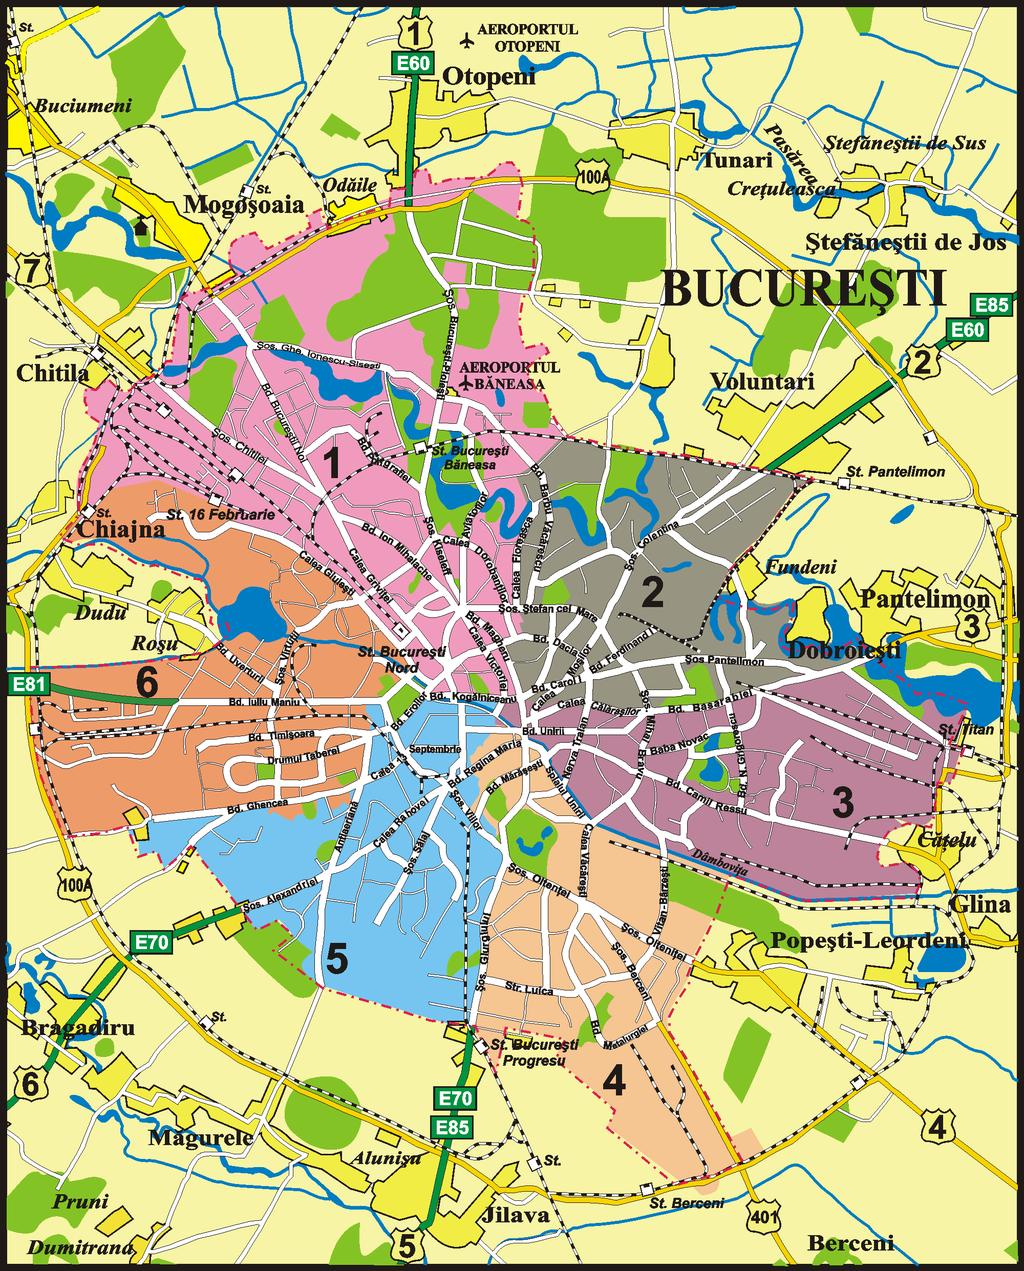 Bucharest Downtown Overview eneral data The downtown of Bucharest mainly consists in the well-known areas such as Victoriei, University, Romana and Unirii, as well as several main neighborhoods like: